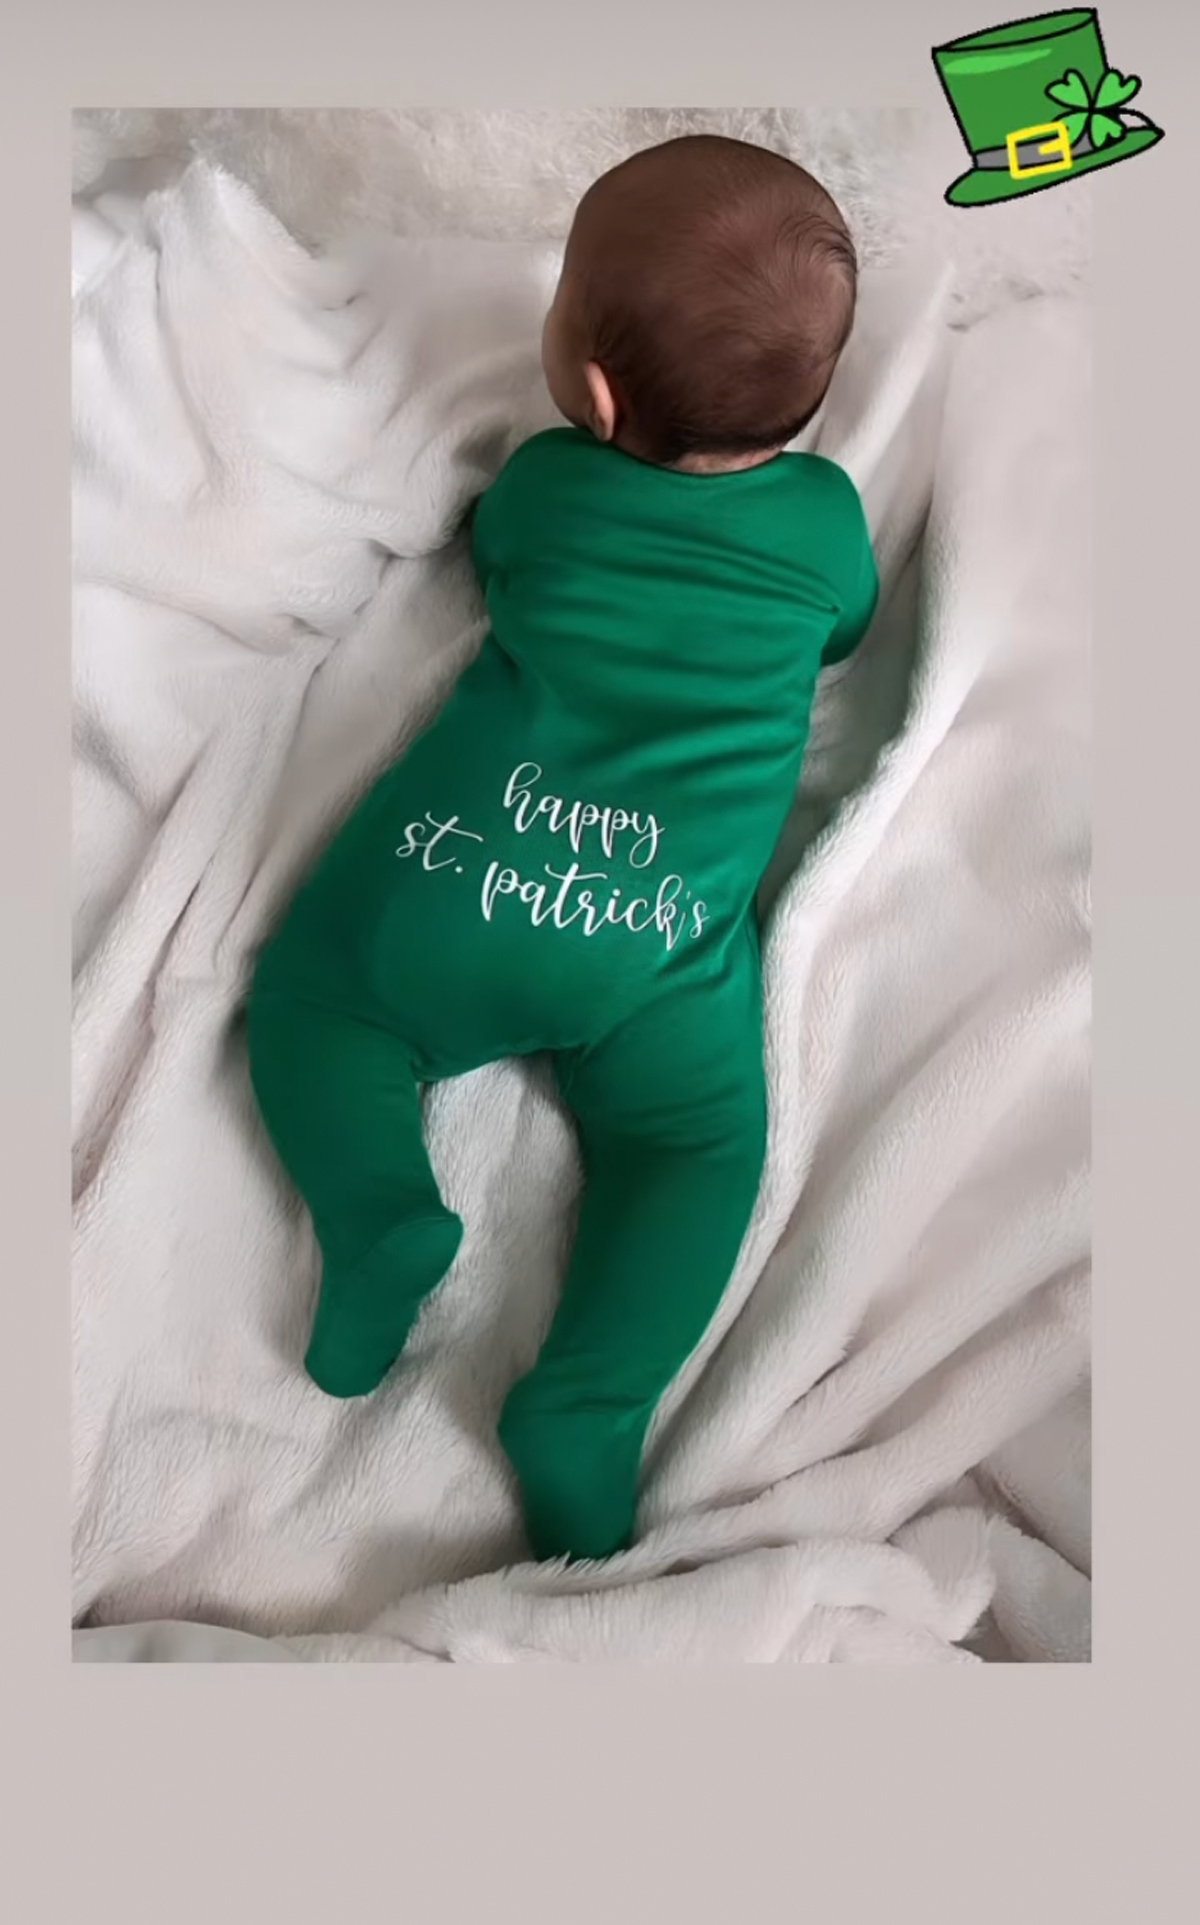 Tristan Thompson’s Baby Momma Maralee Nichols Shares Another Rare Pic Of Their Son Theo